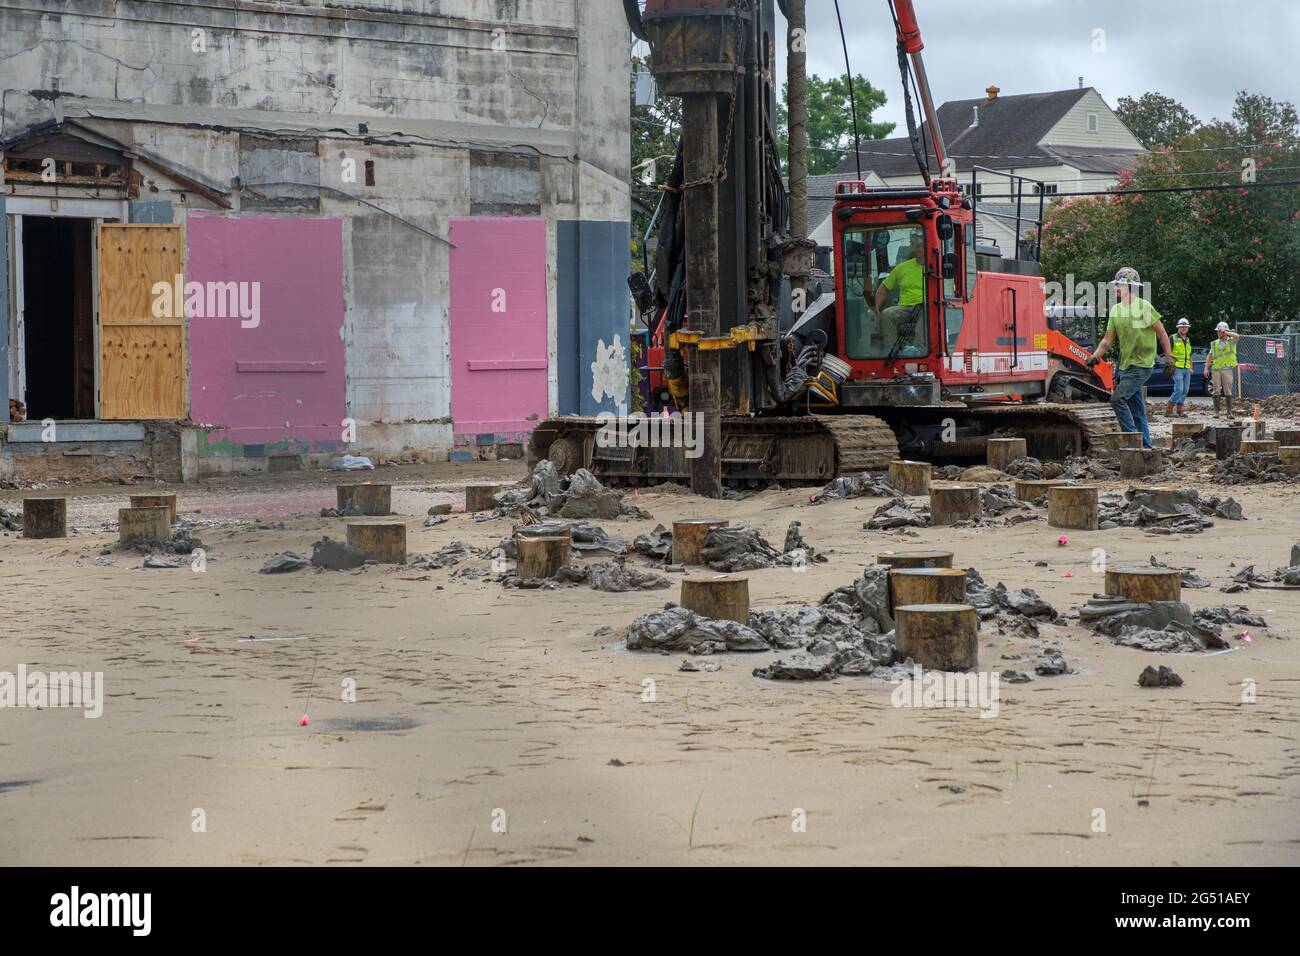 NEW ORLEANS, LA, USA - JUNE 22, 2021: Industrial pile driver and workers preparing  foundation for new construction in Uptown New Orleans Stock Photo